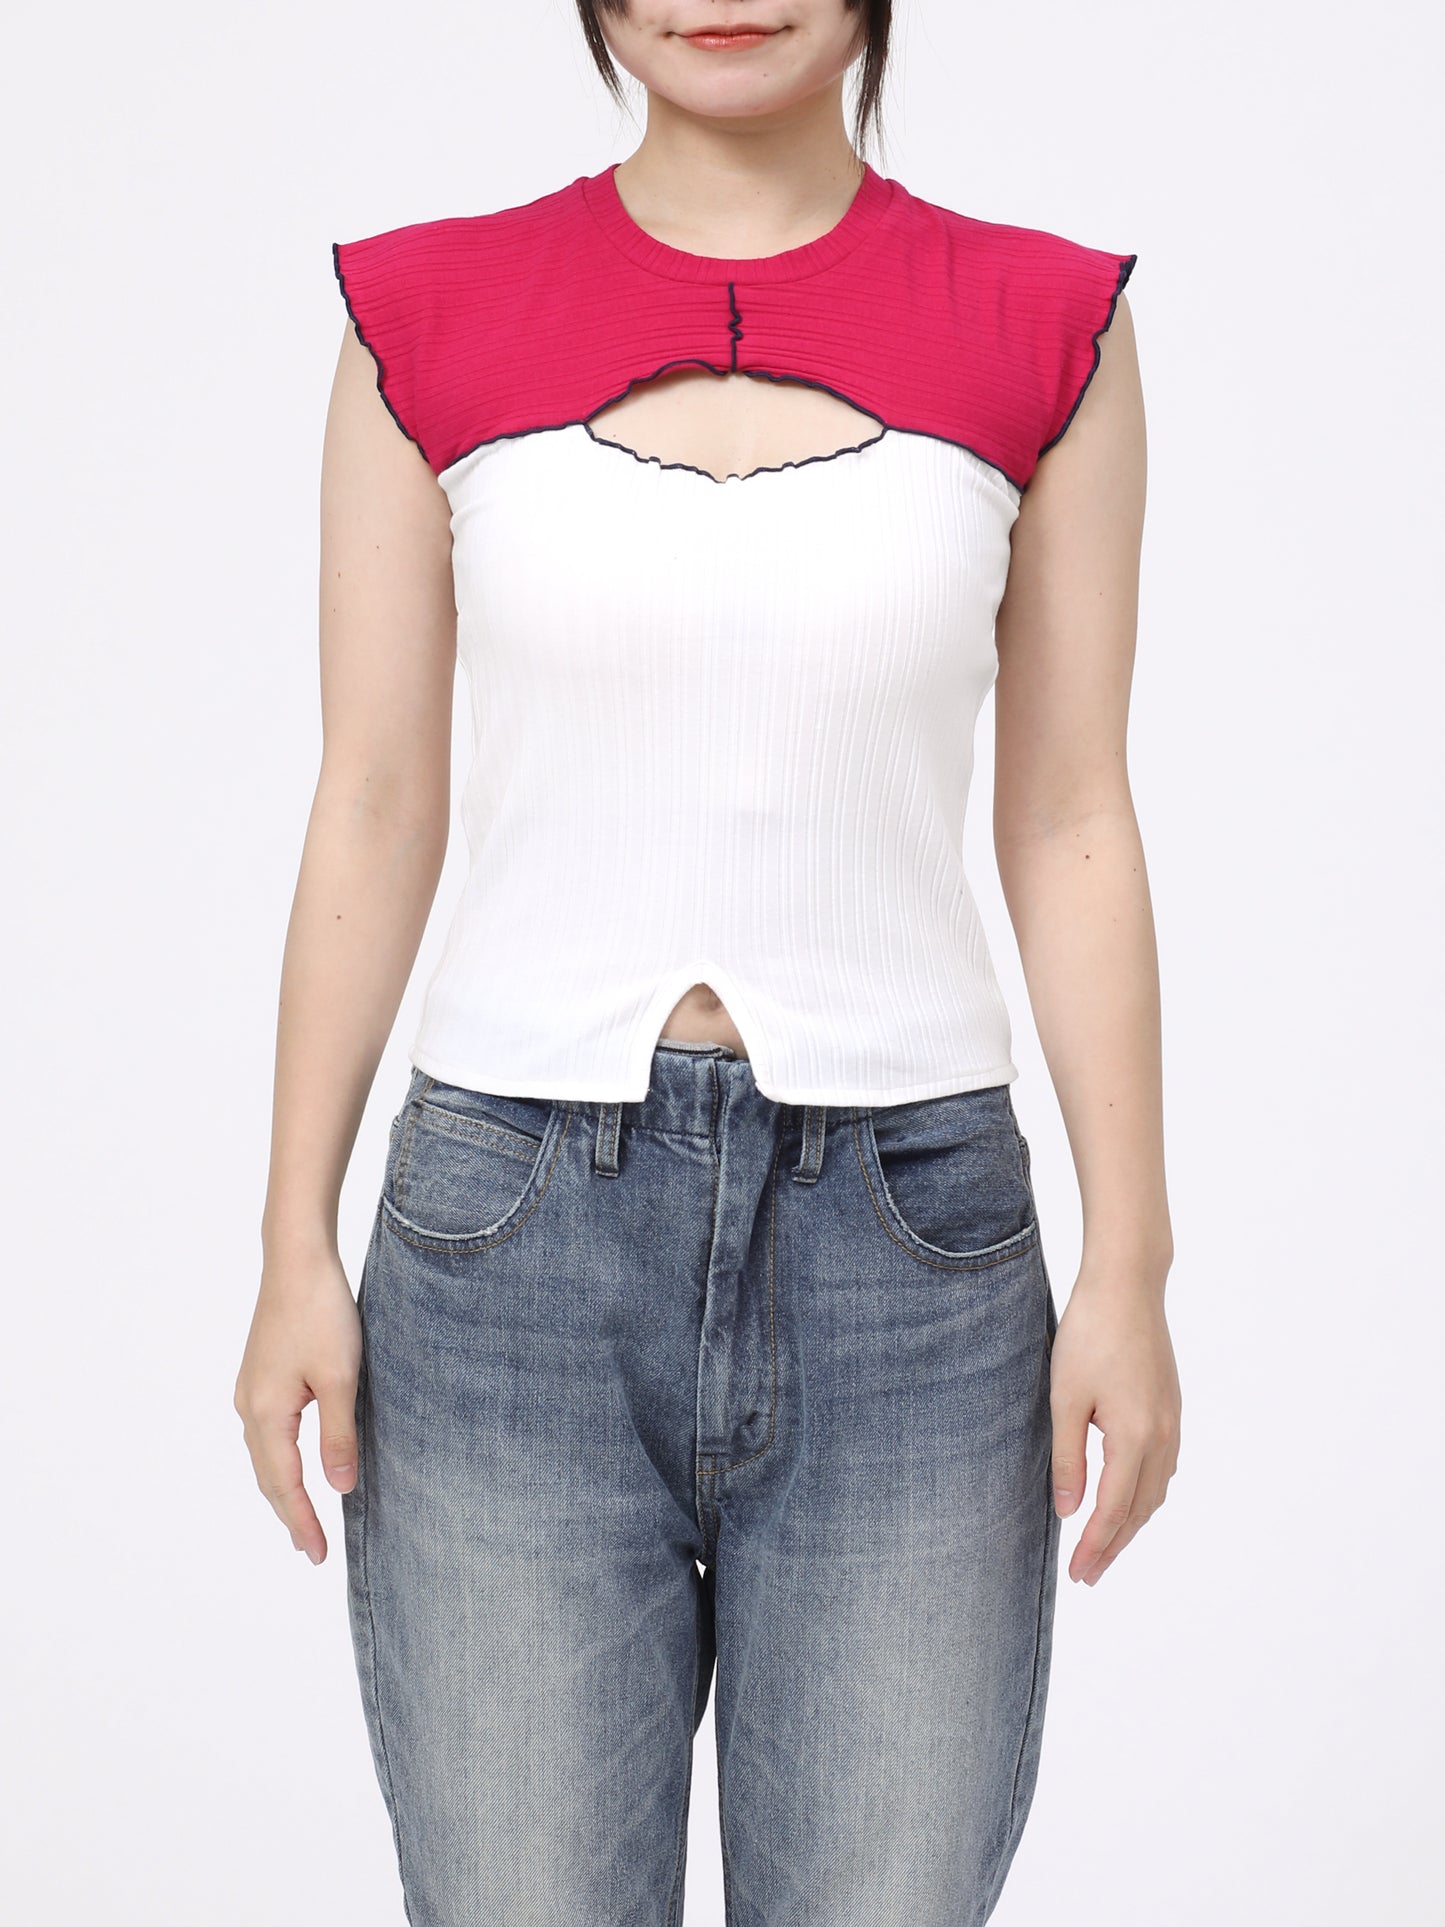 LOVER TOP S/S  RIB STRETCH JERSEY BICOLOR AM-C0411